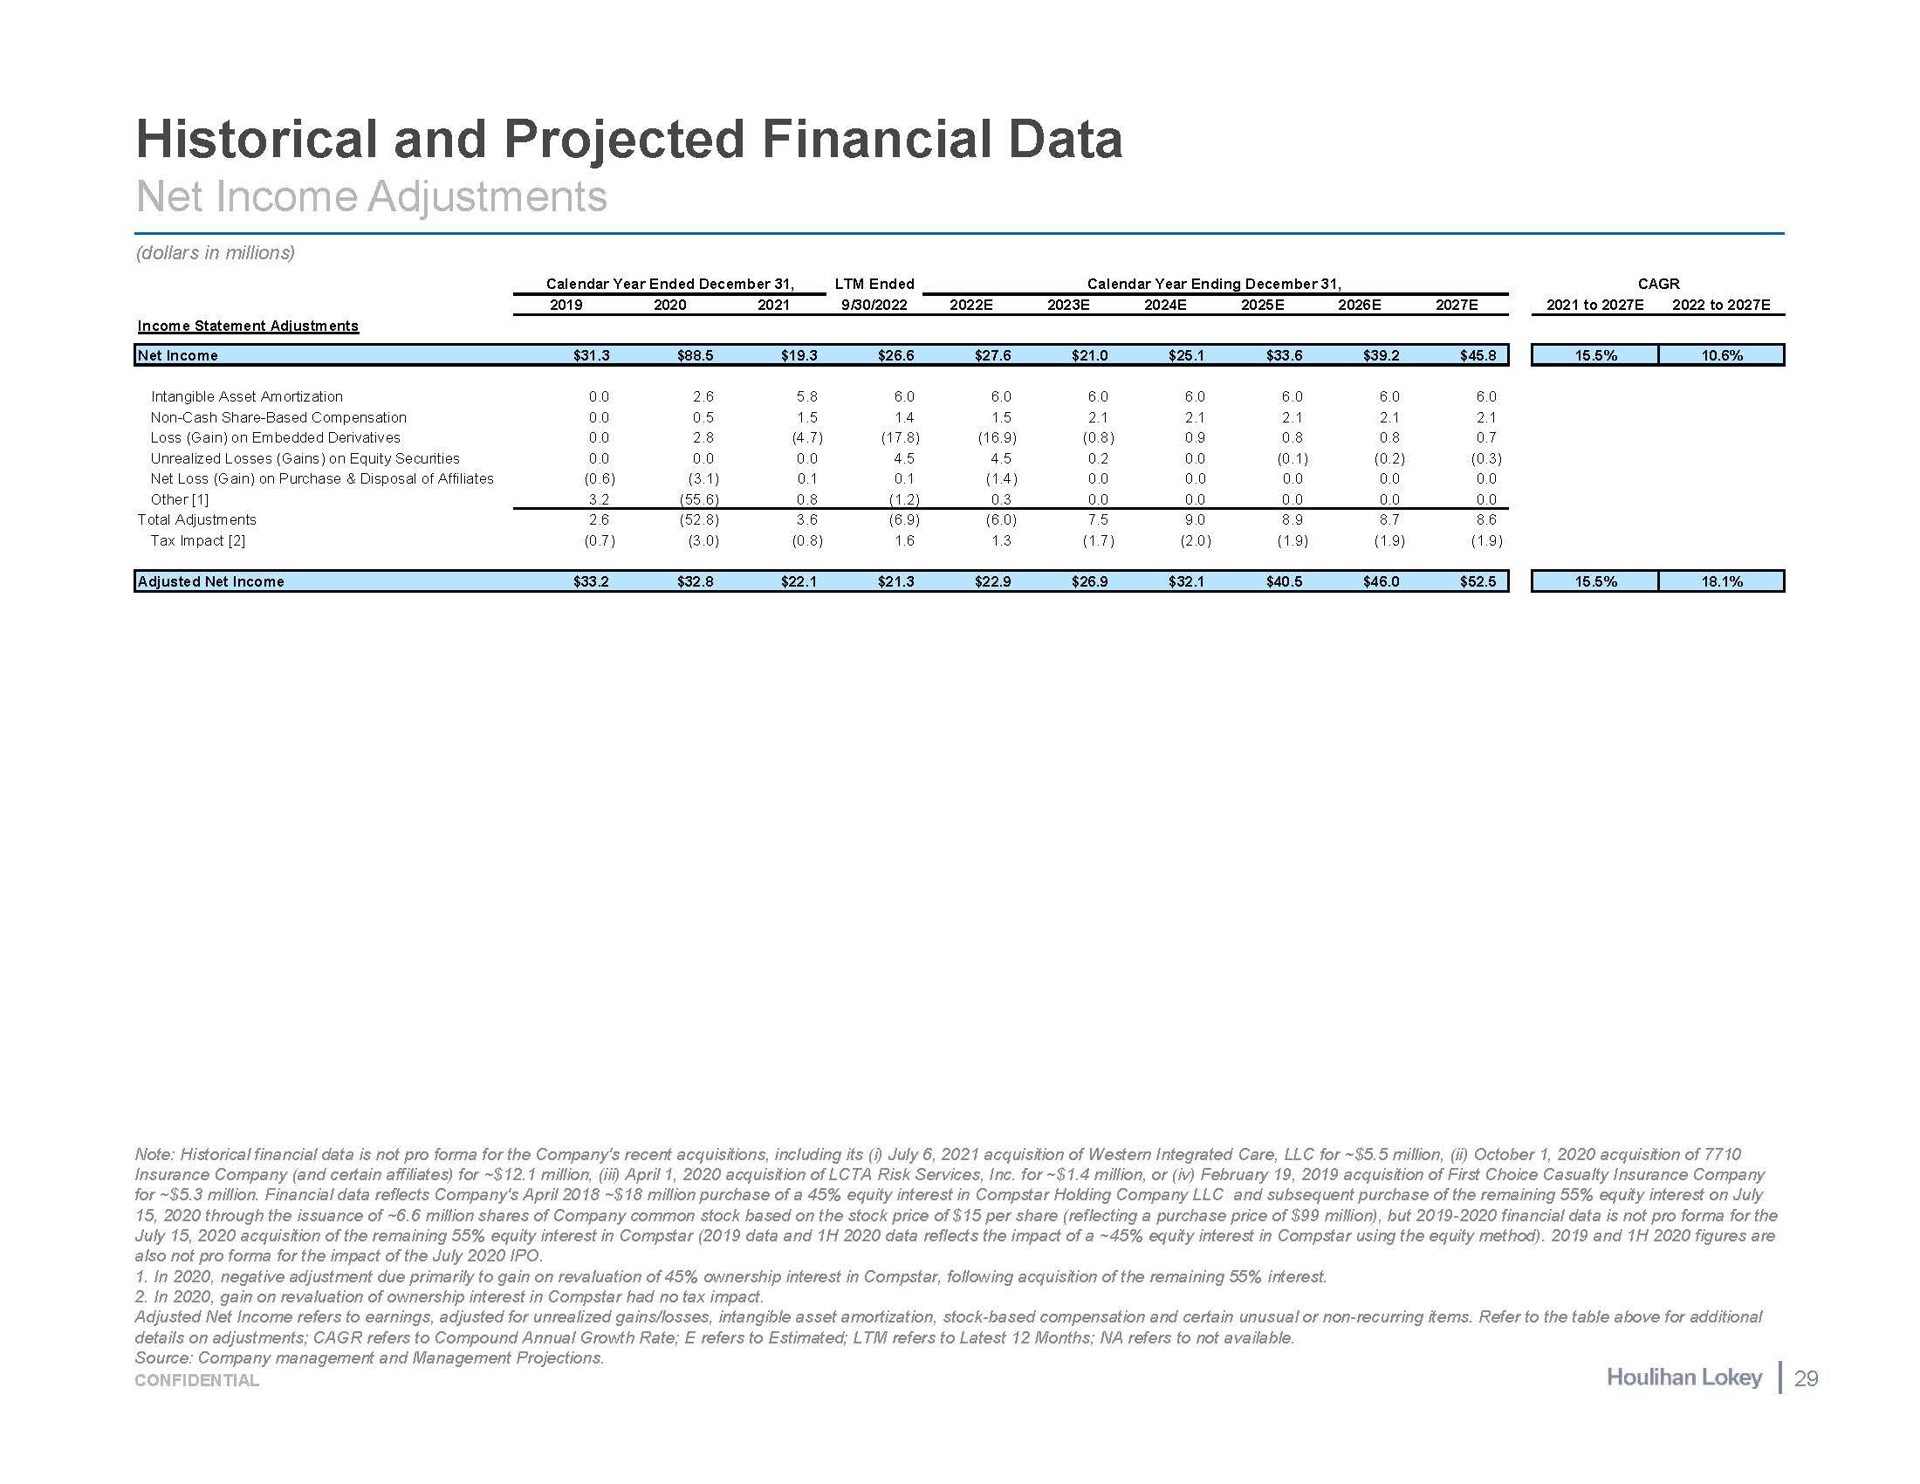 historical and projected financial data | Houlihan Lokey